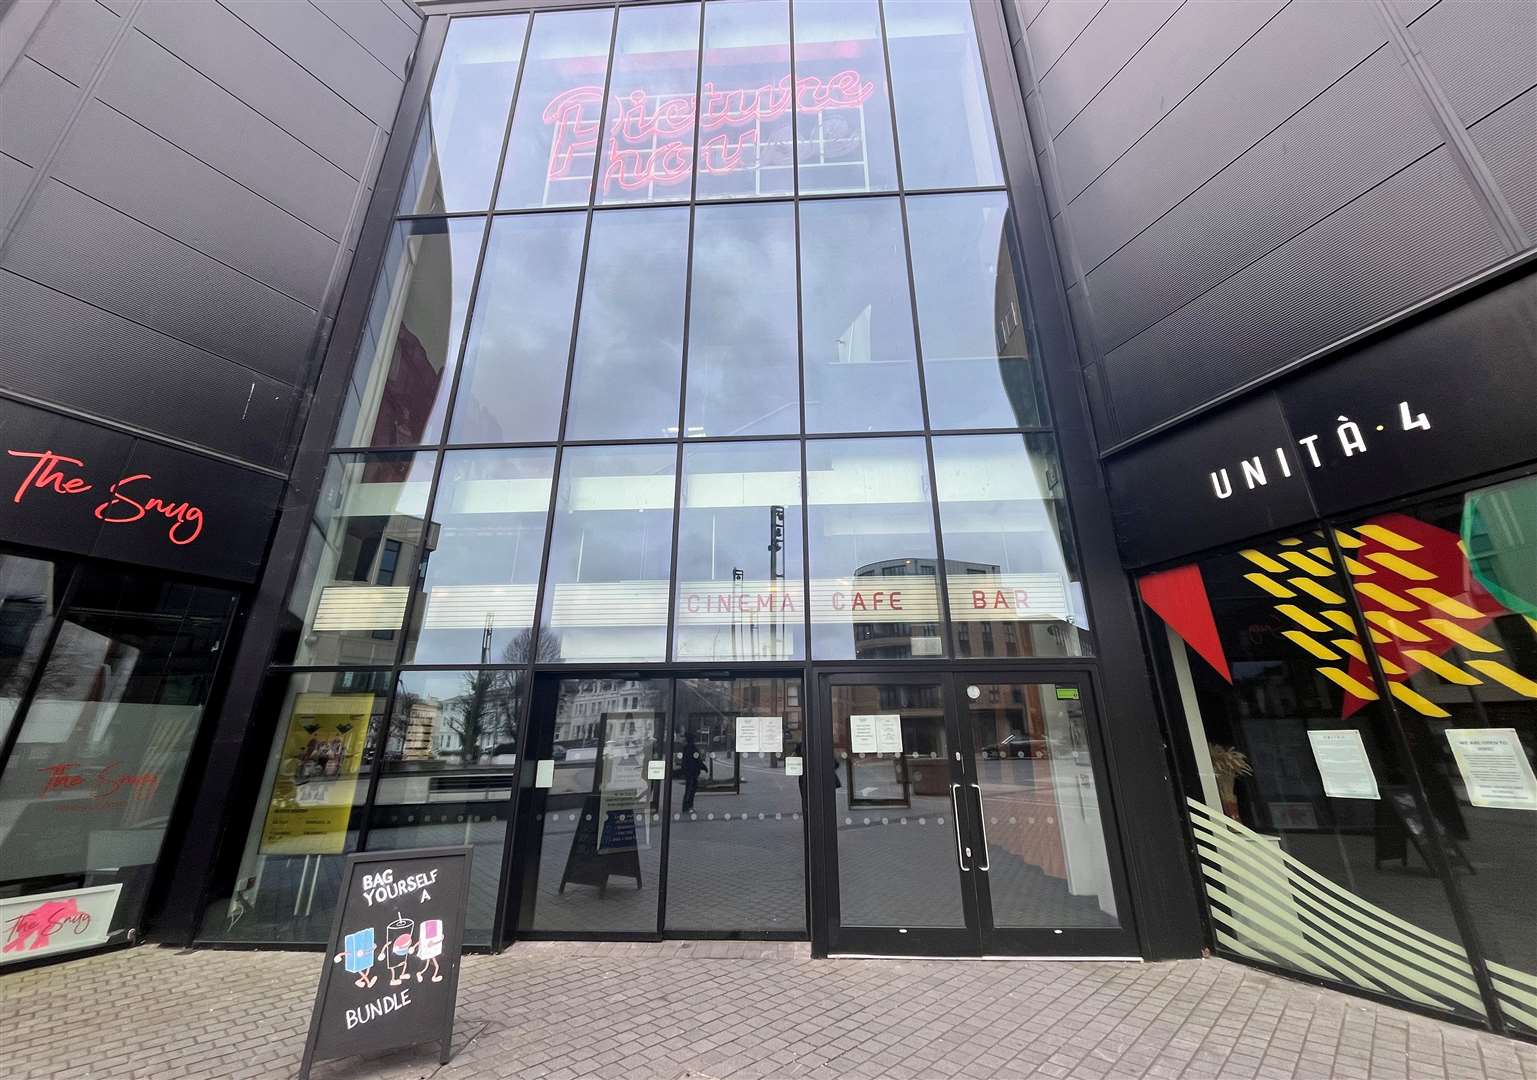 Picturehouse is one of two ‘anchor tenants’ at Elwick Place